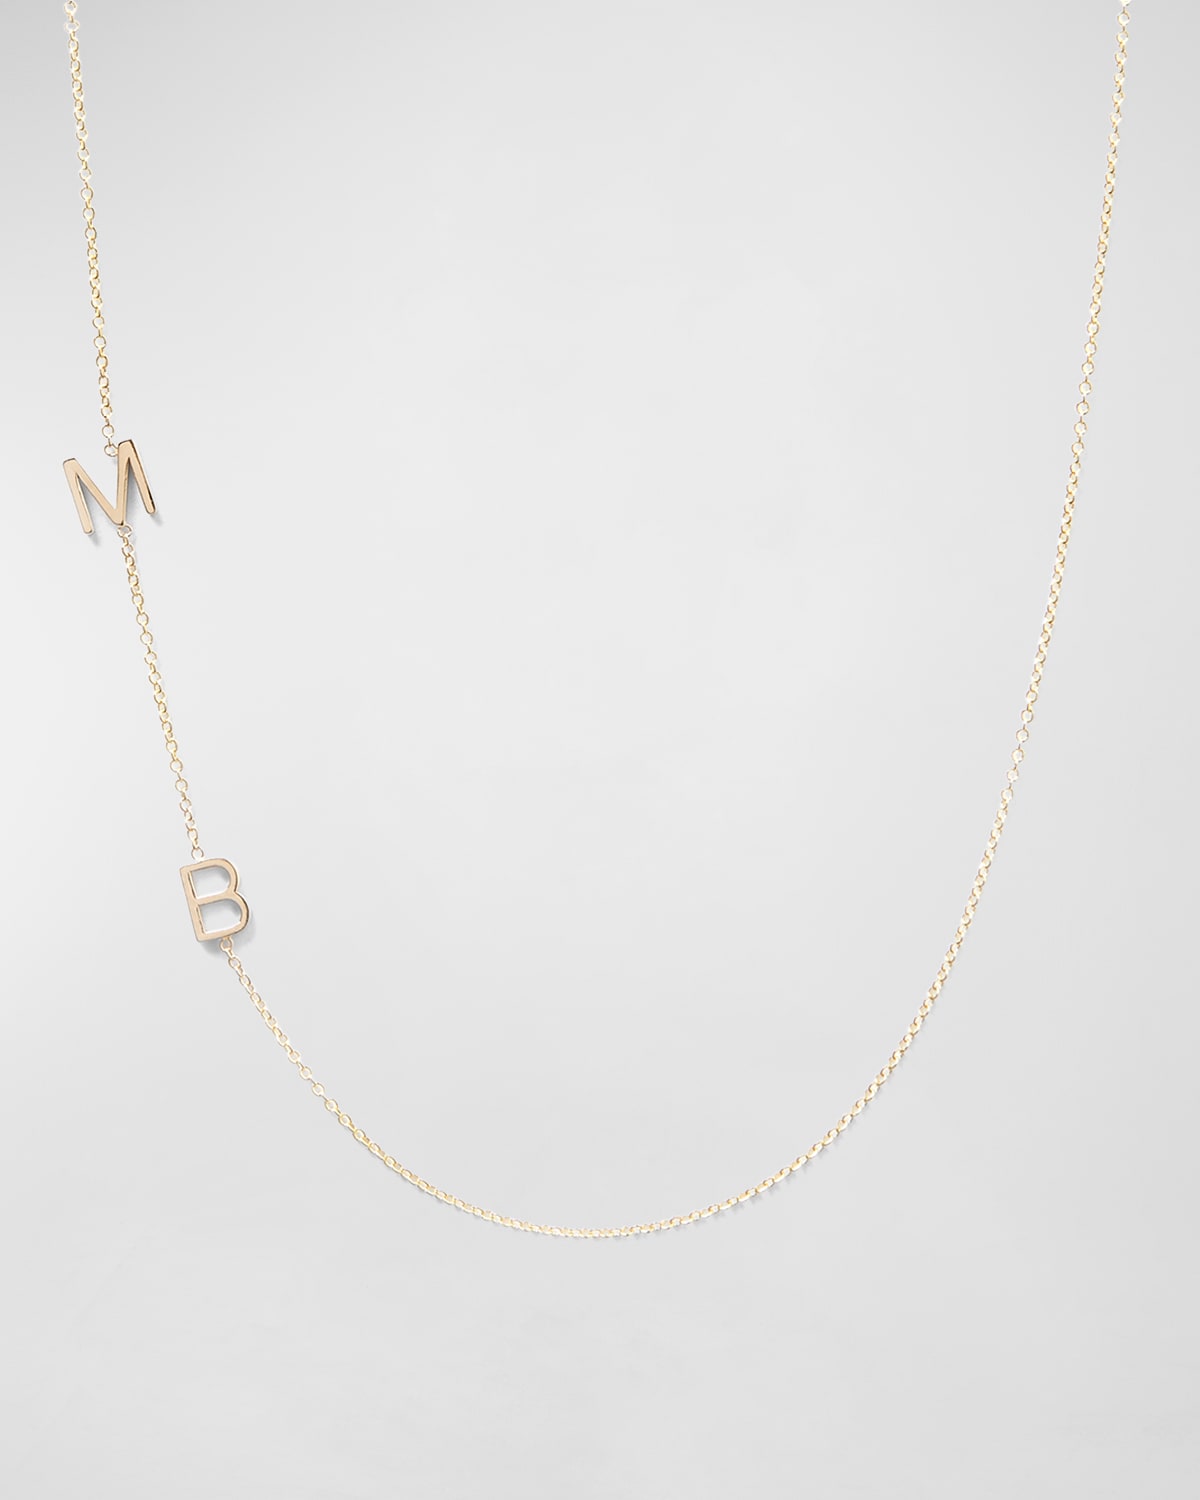 Maya Brenner Designs Mini 2-letter Personalized Necklace, 14k Yellow Gold